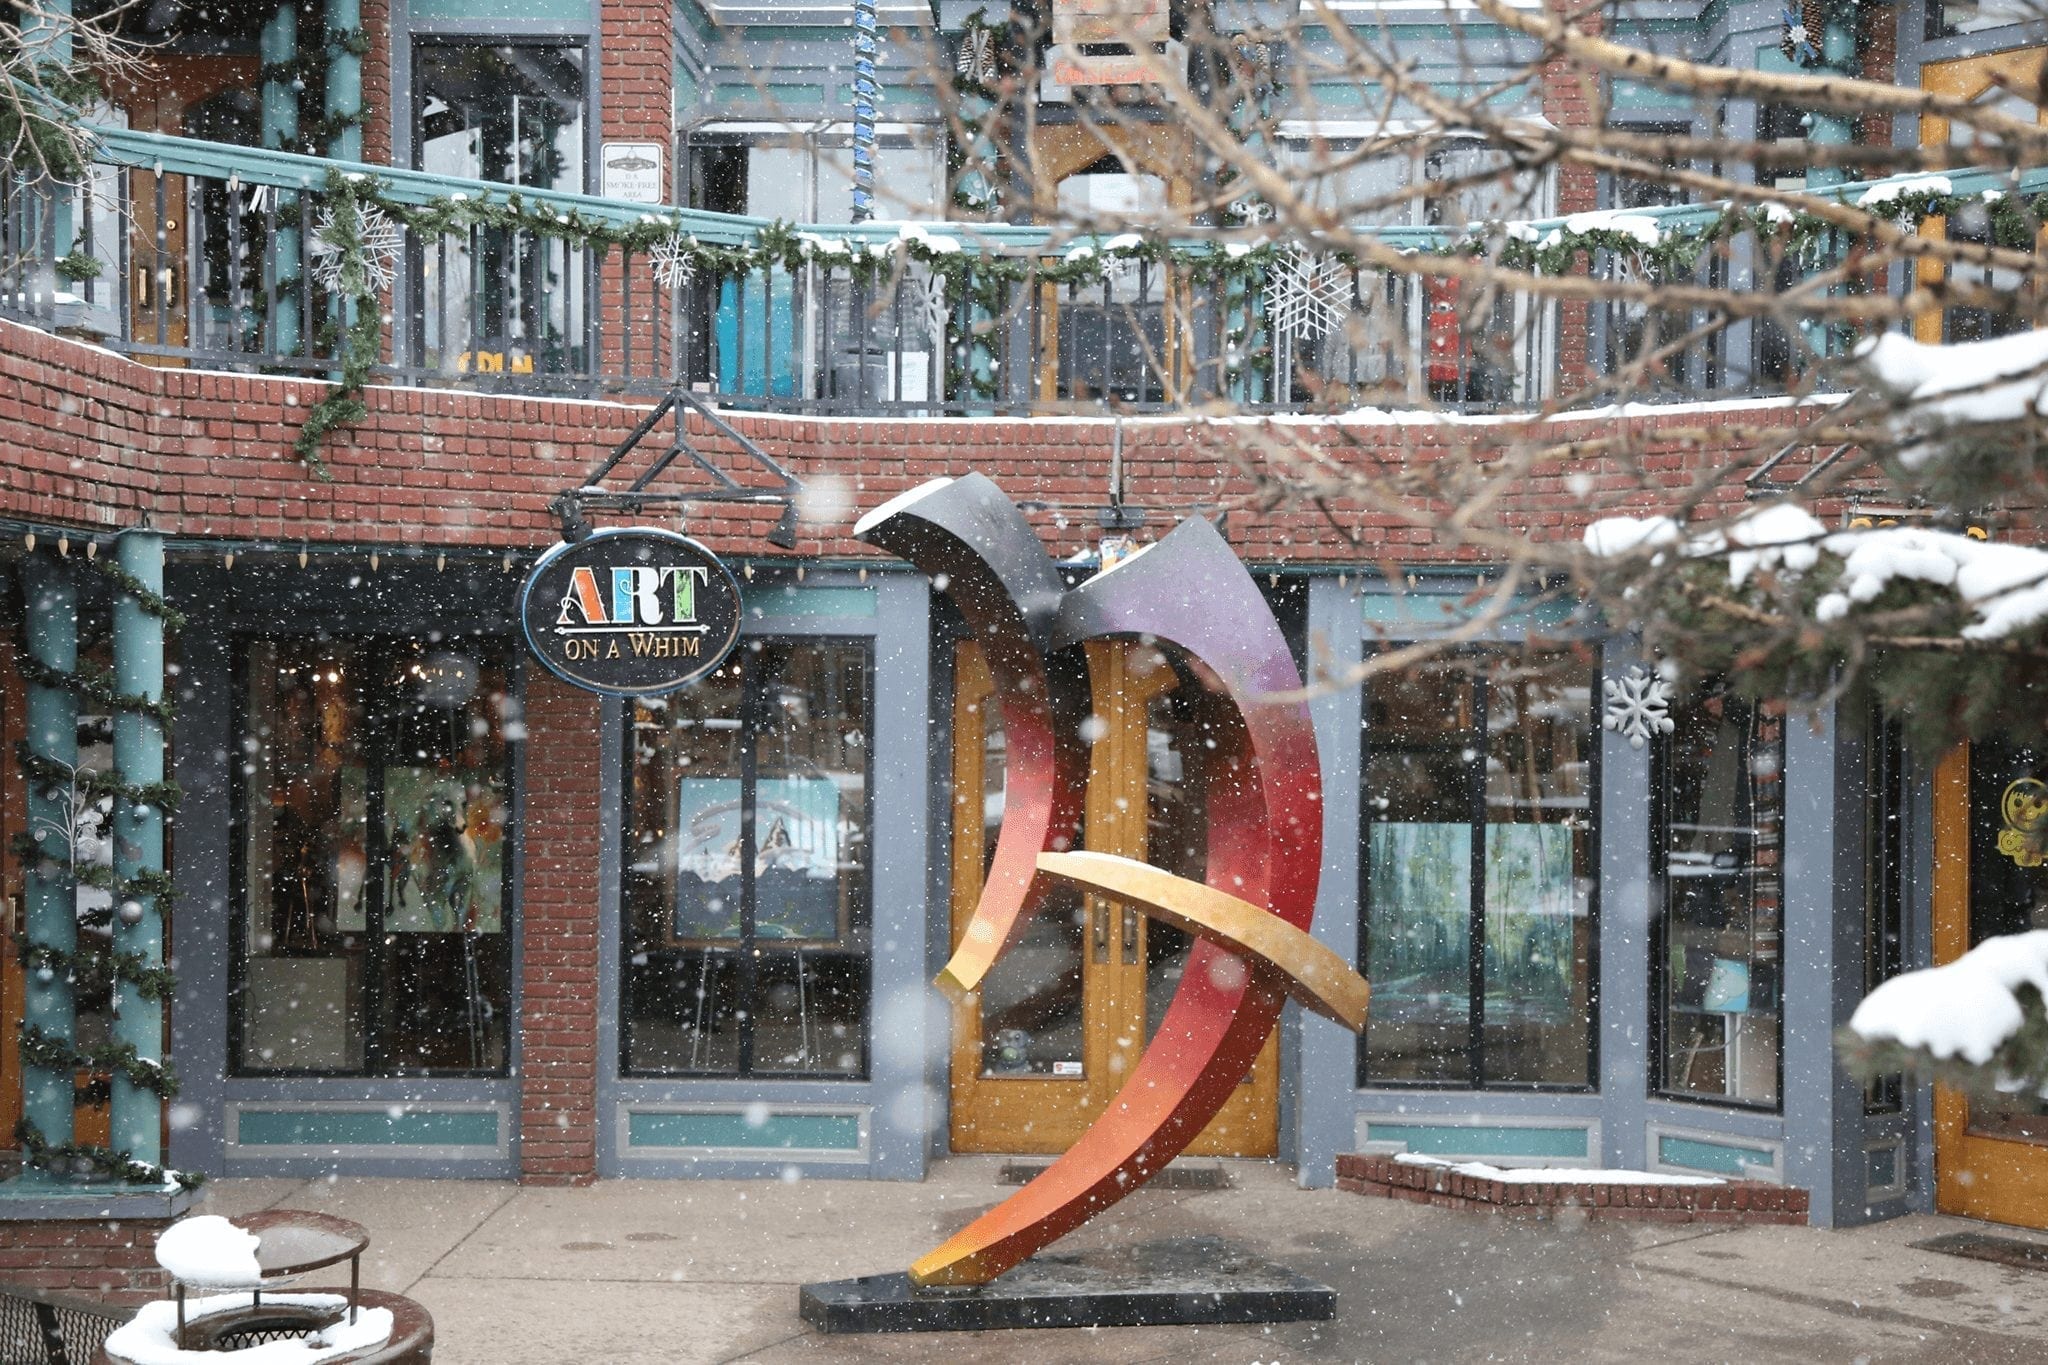 Snow falling during winter in front of an art gallery and sculpture.